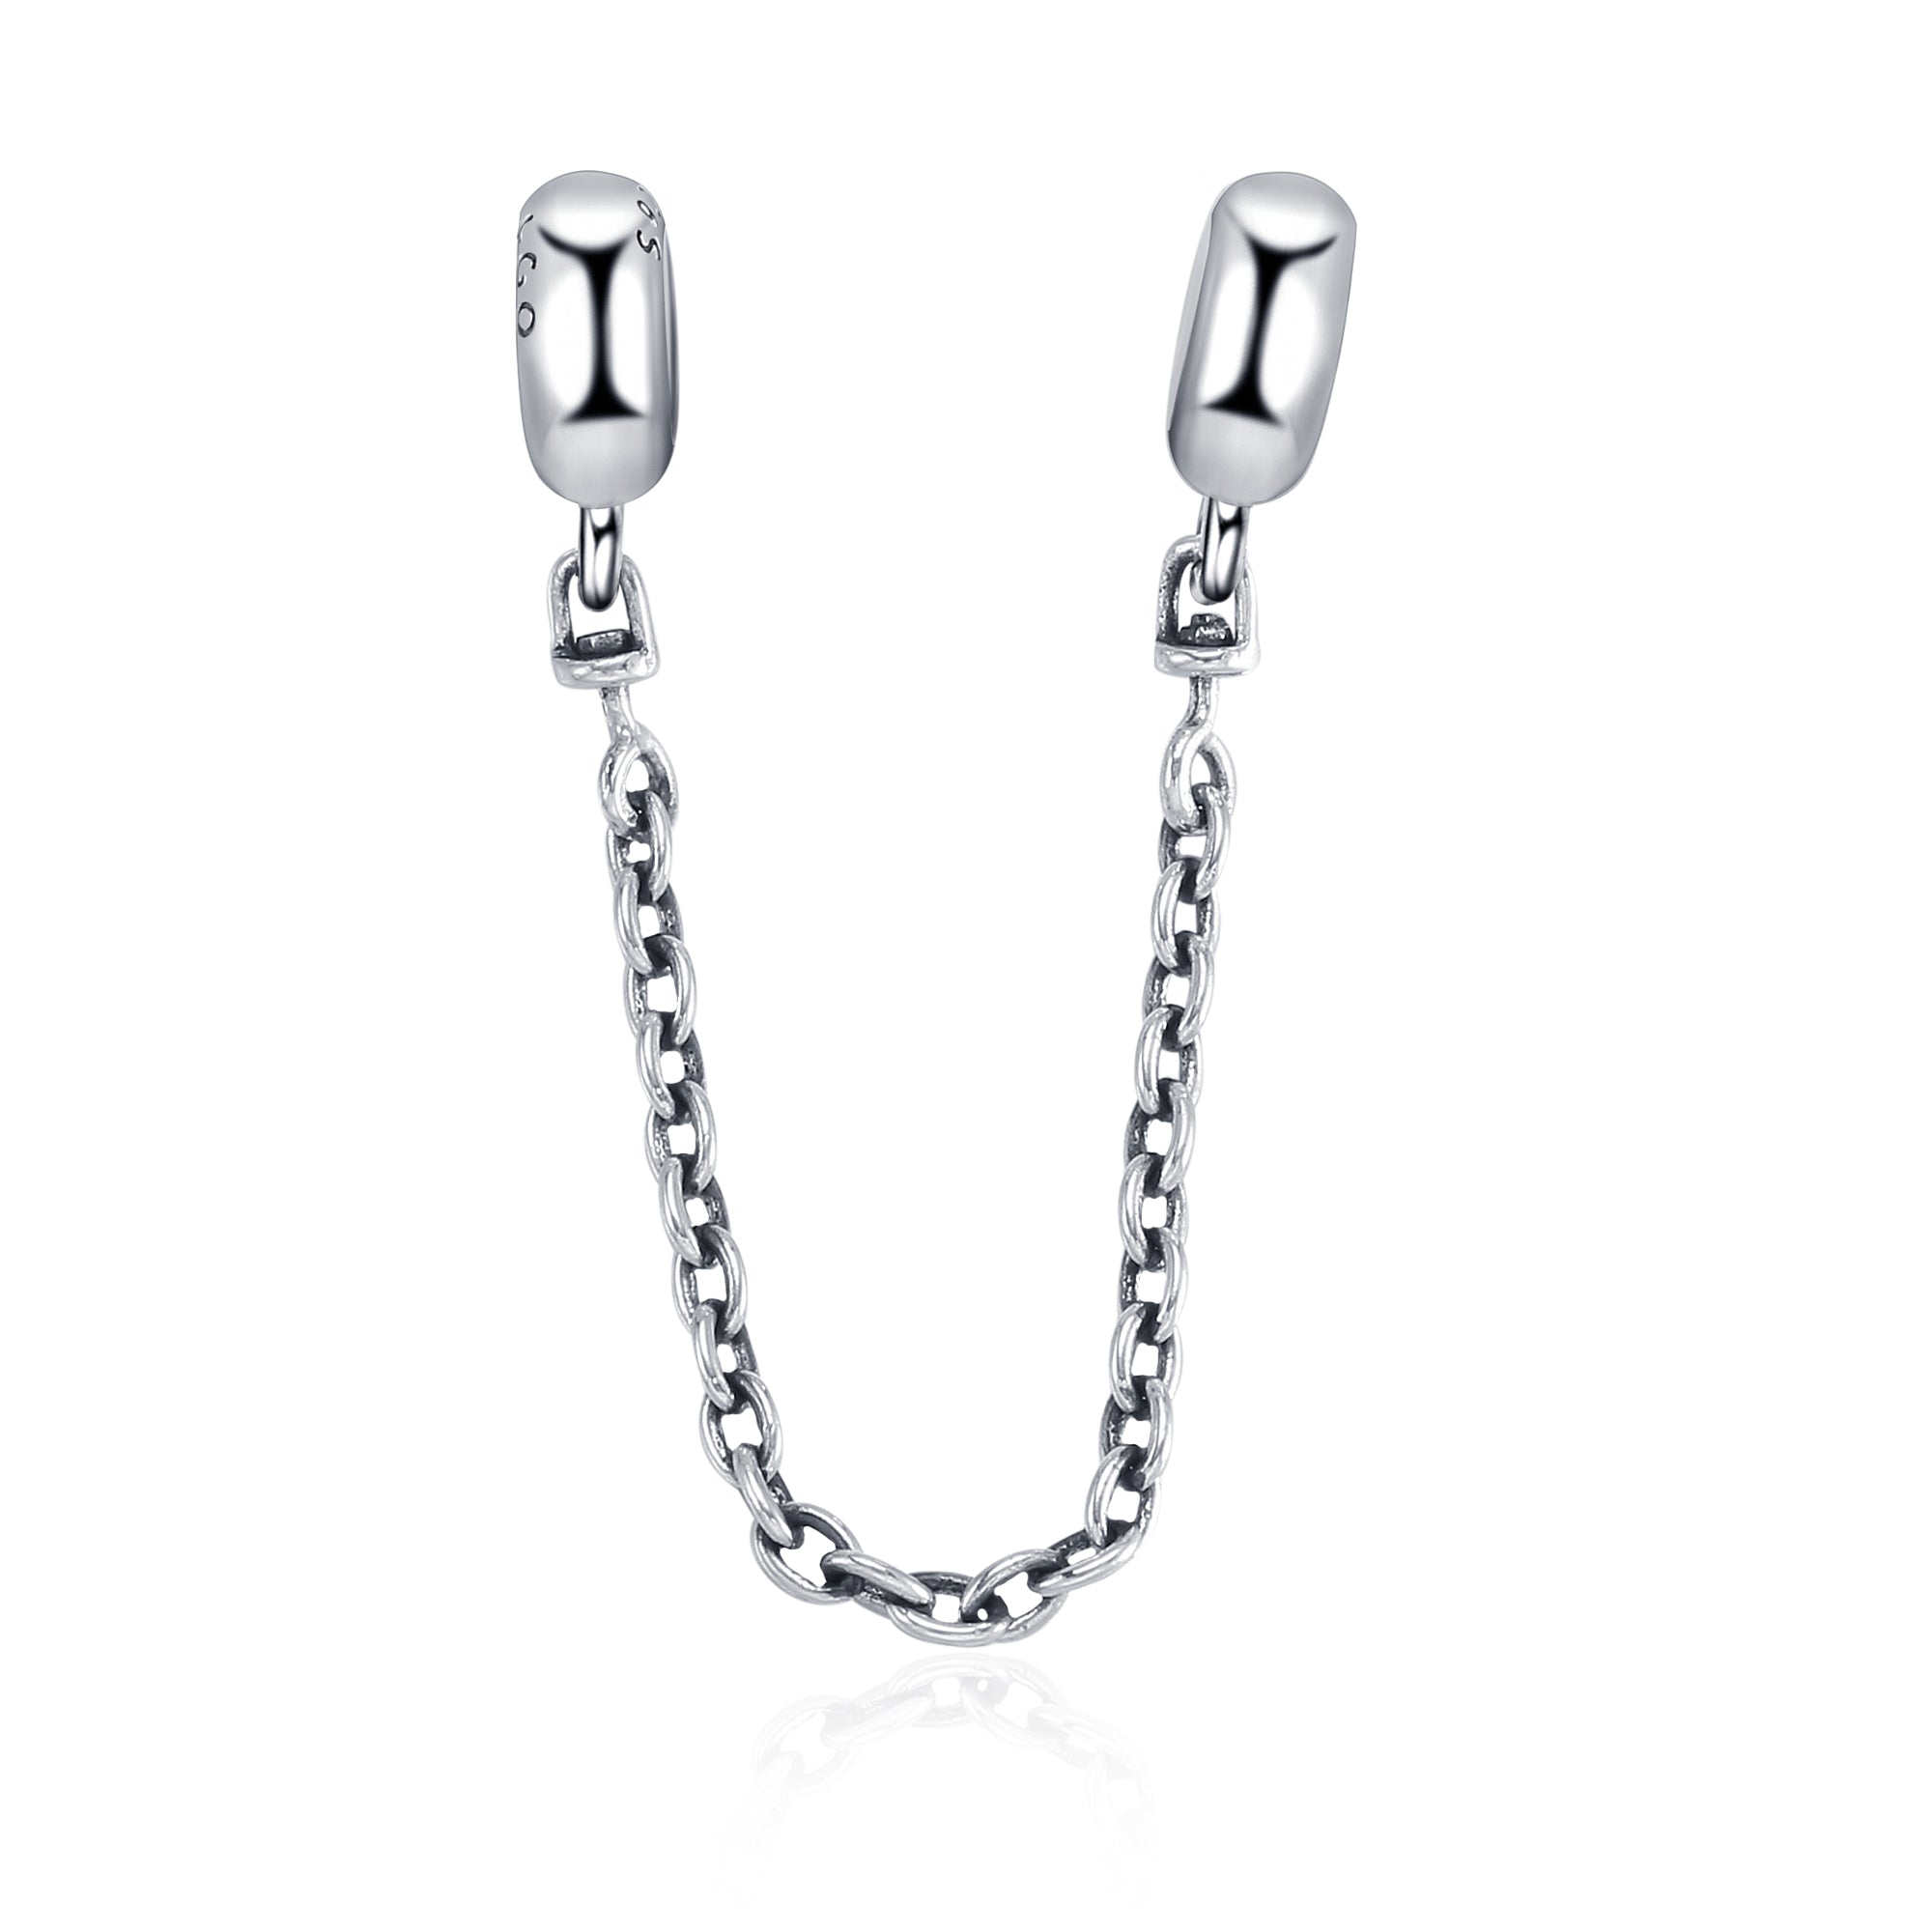 Classic Safety Chain Bracelet Accessory Beads Chain 925 Sterling Silver Making